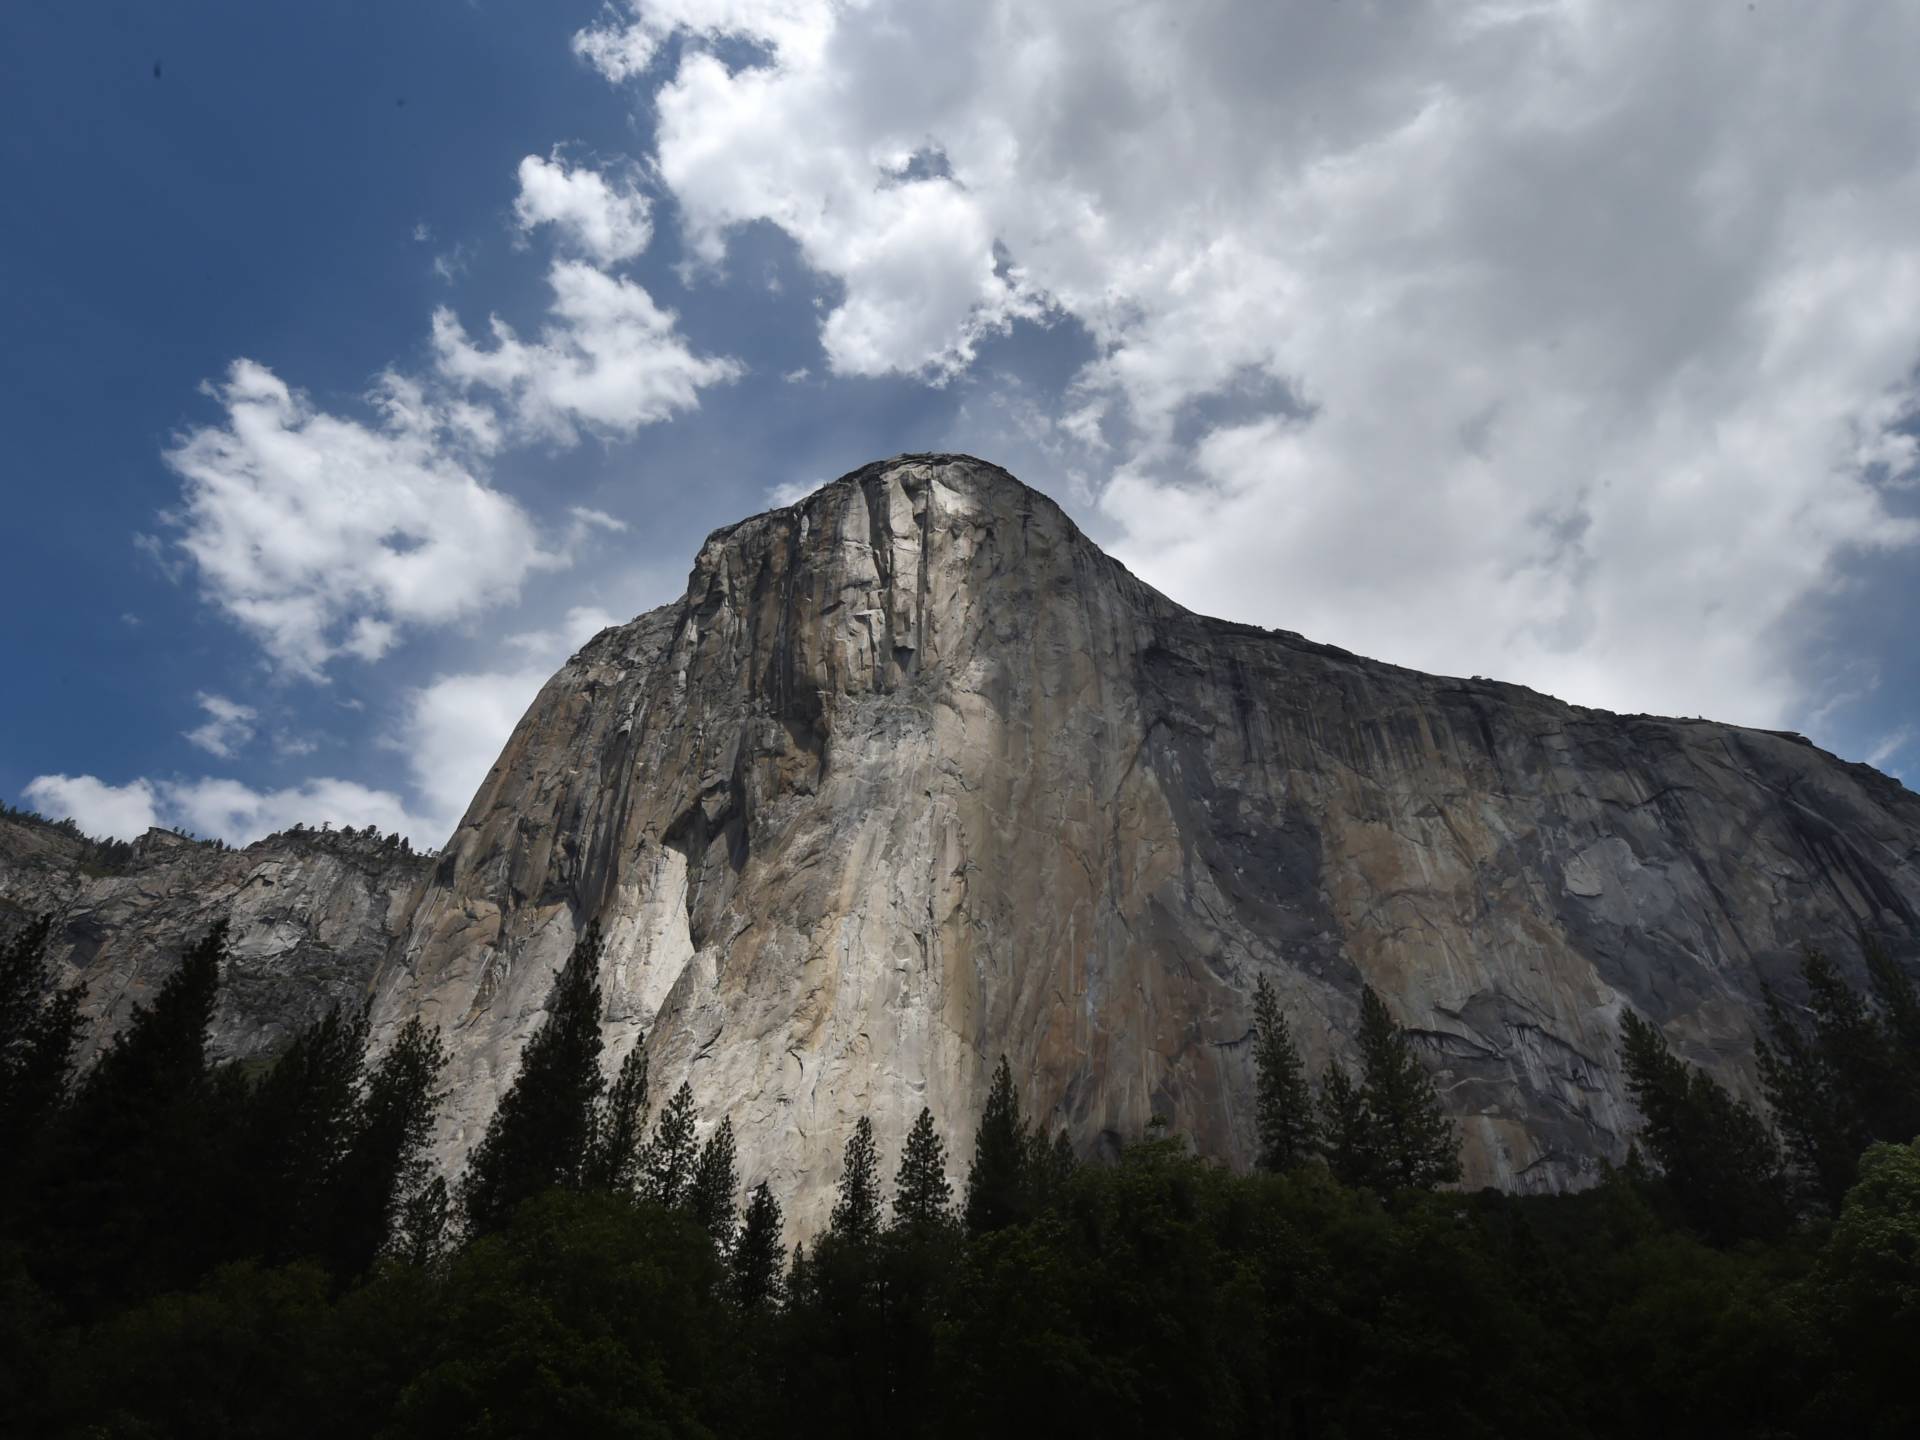 The El Capitan monolith in Yosemite National Park, seen in June 2015. On Wednesday, climbers Alex Honnold and Tommy Caldwell managed a feat in under two hours that most climbers take days to achieve — scaling the famous "Nose" route up the rock. Mark Ralston/AFP/Getty Images